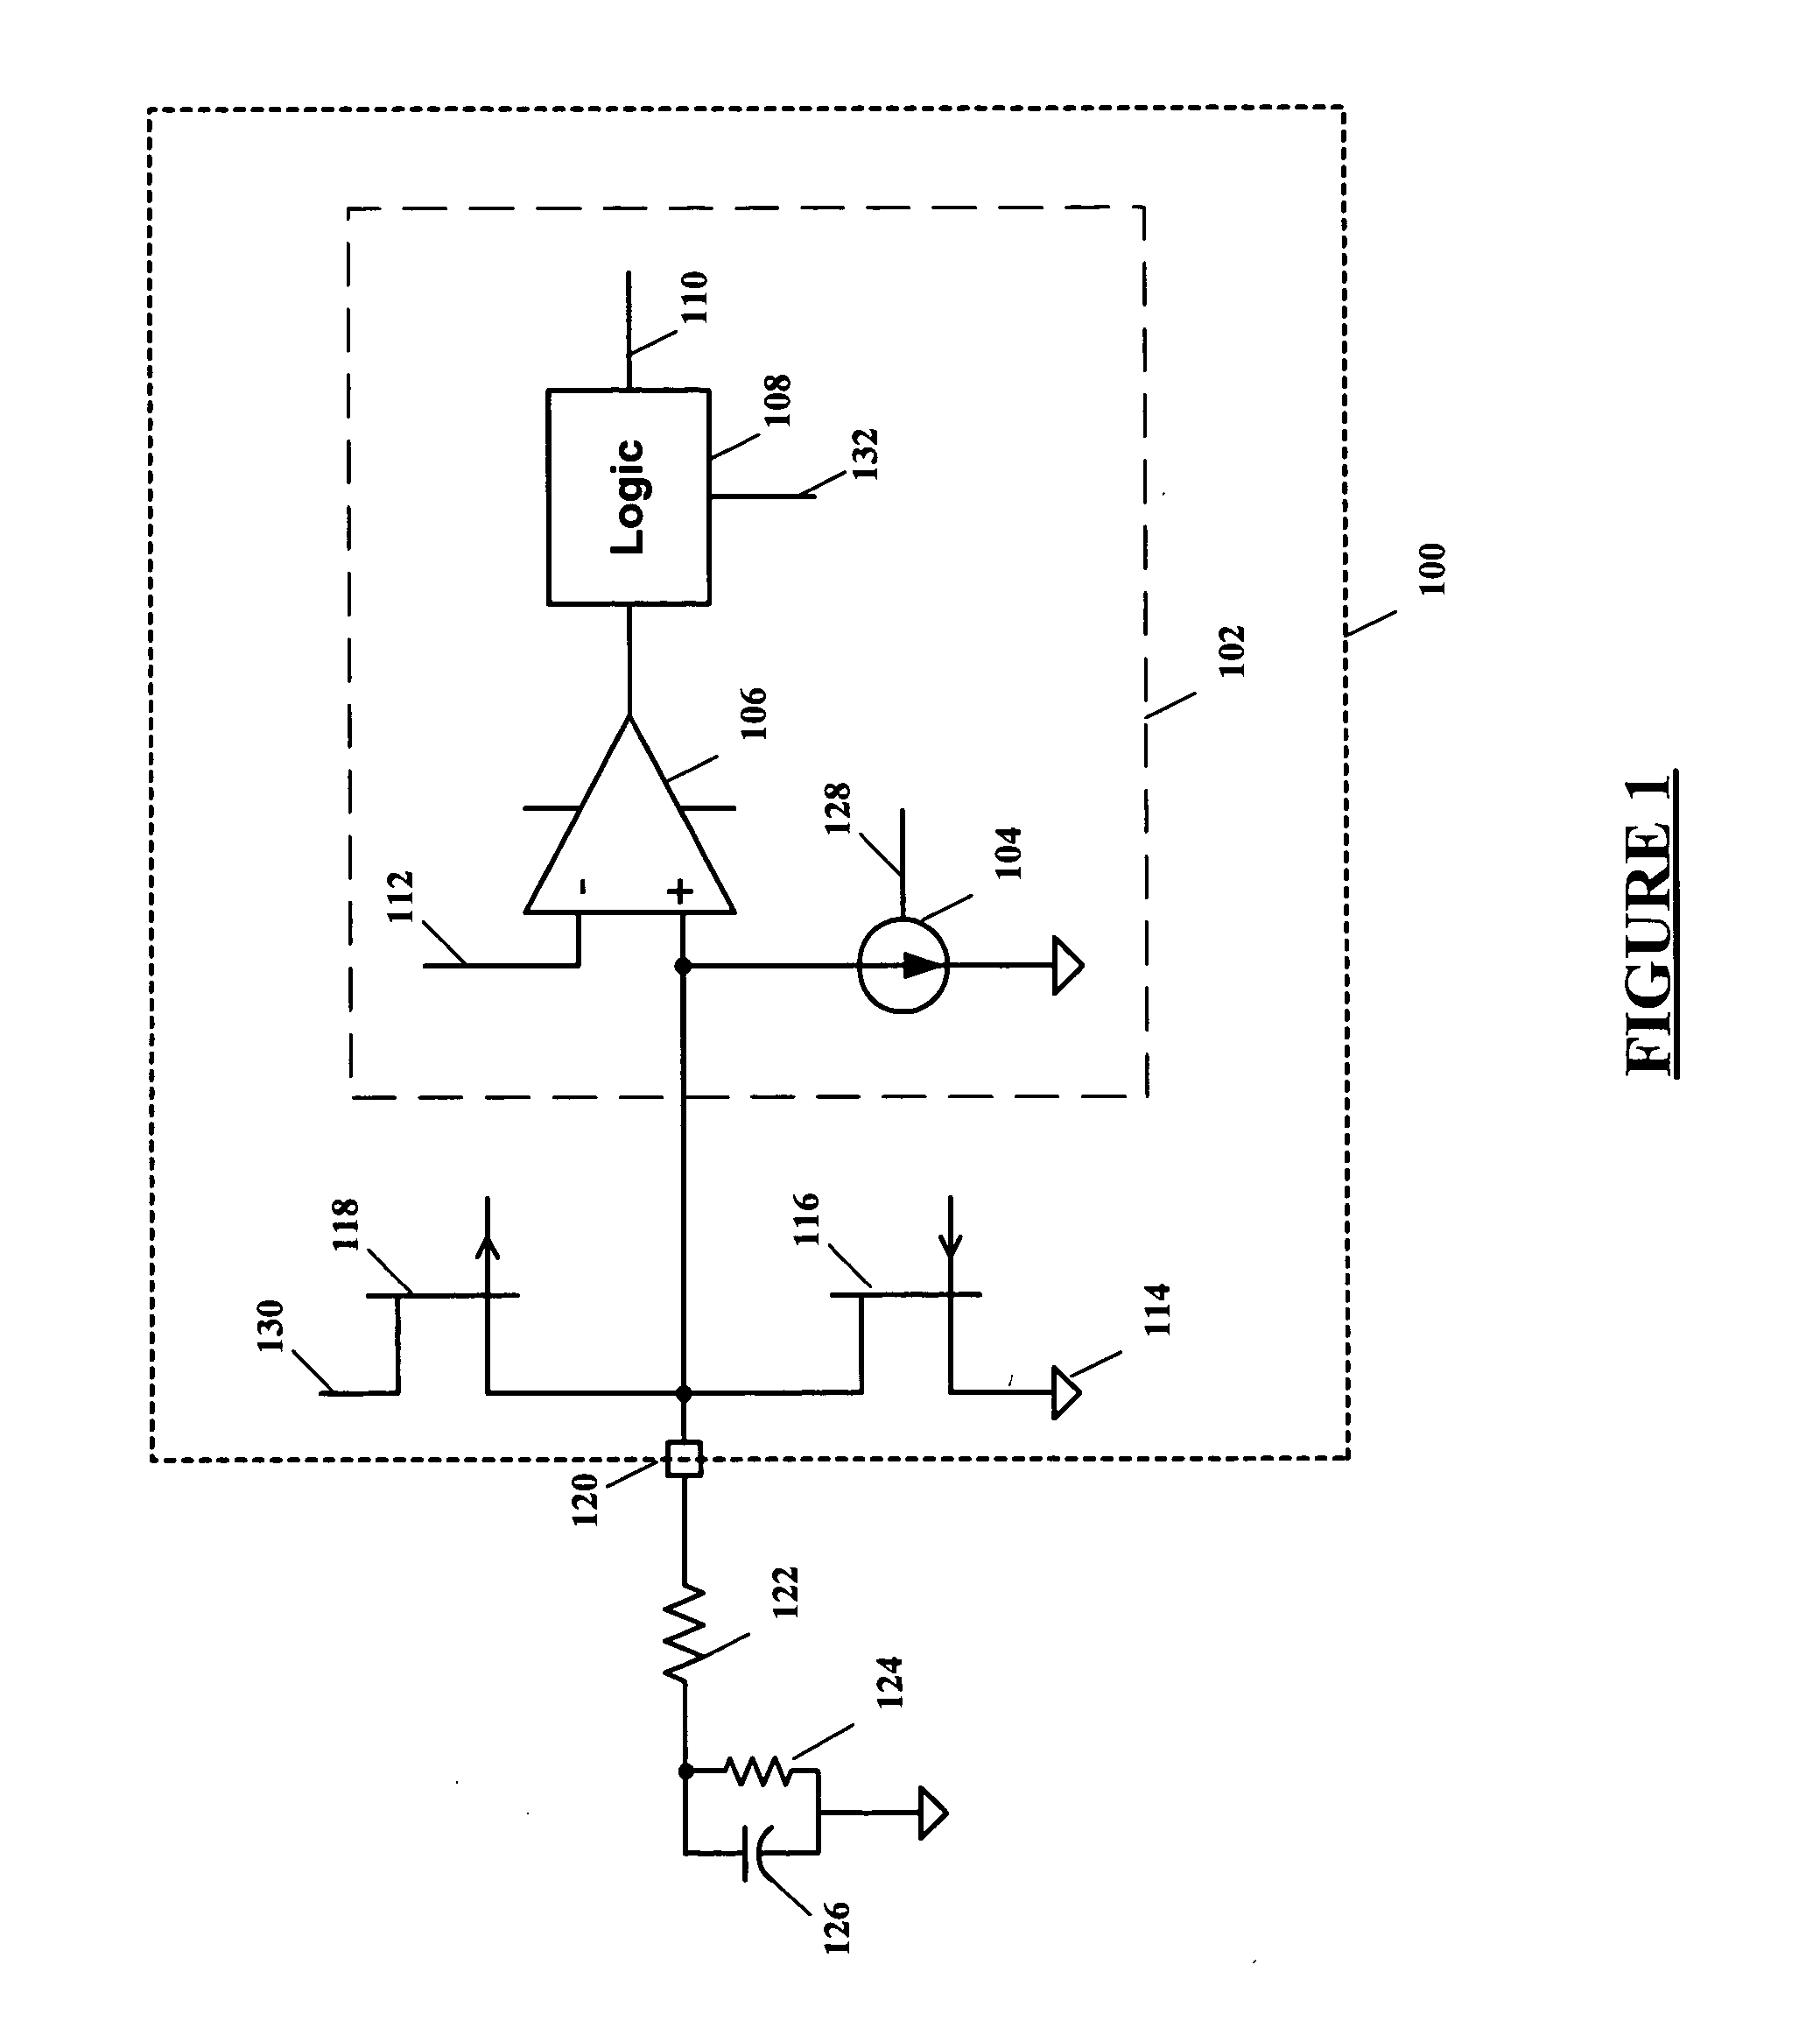 Ultra-low power programmable timer and low voltage detection circuits